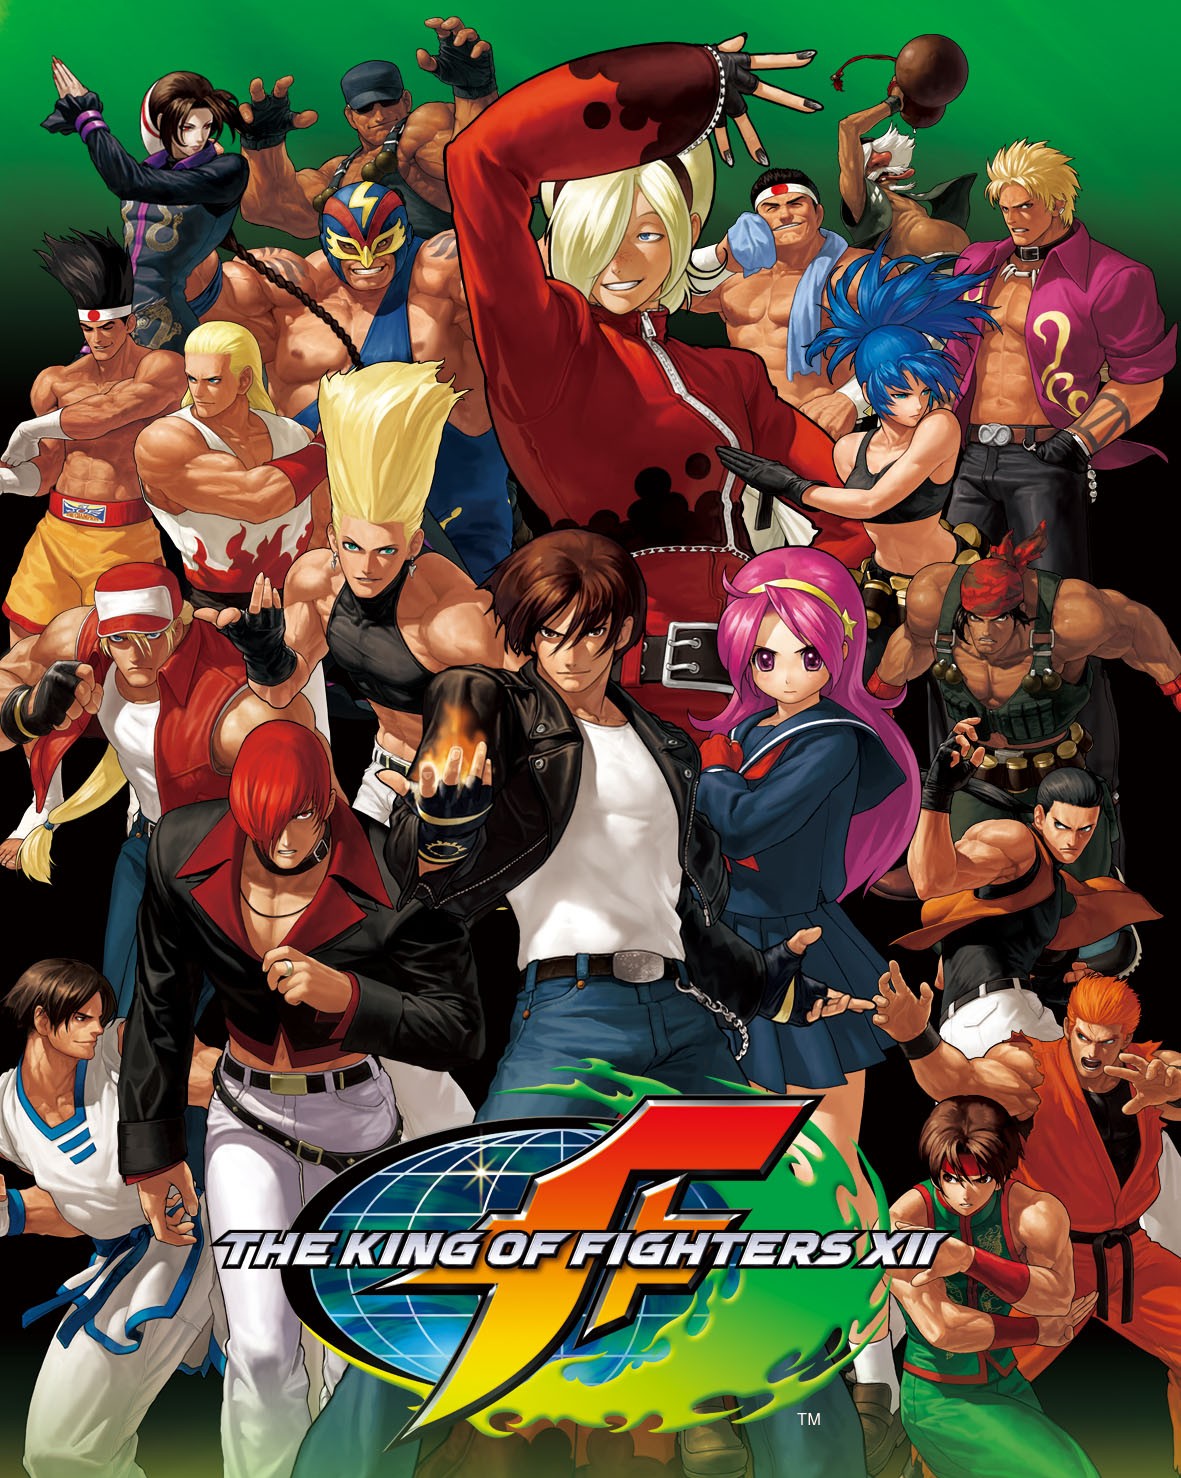 Free Download The King of Fighters PC Game All Collection Full Version